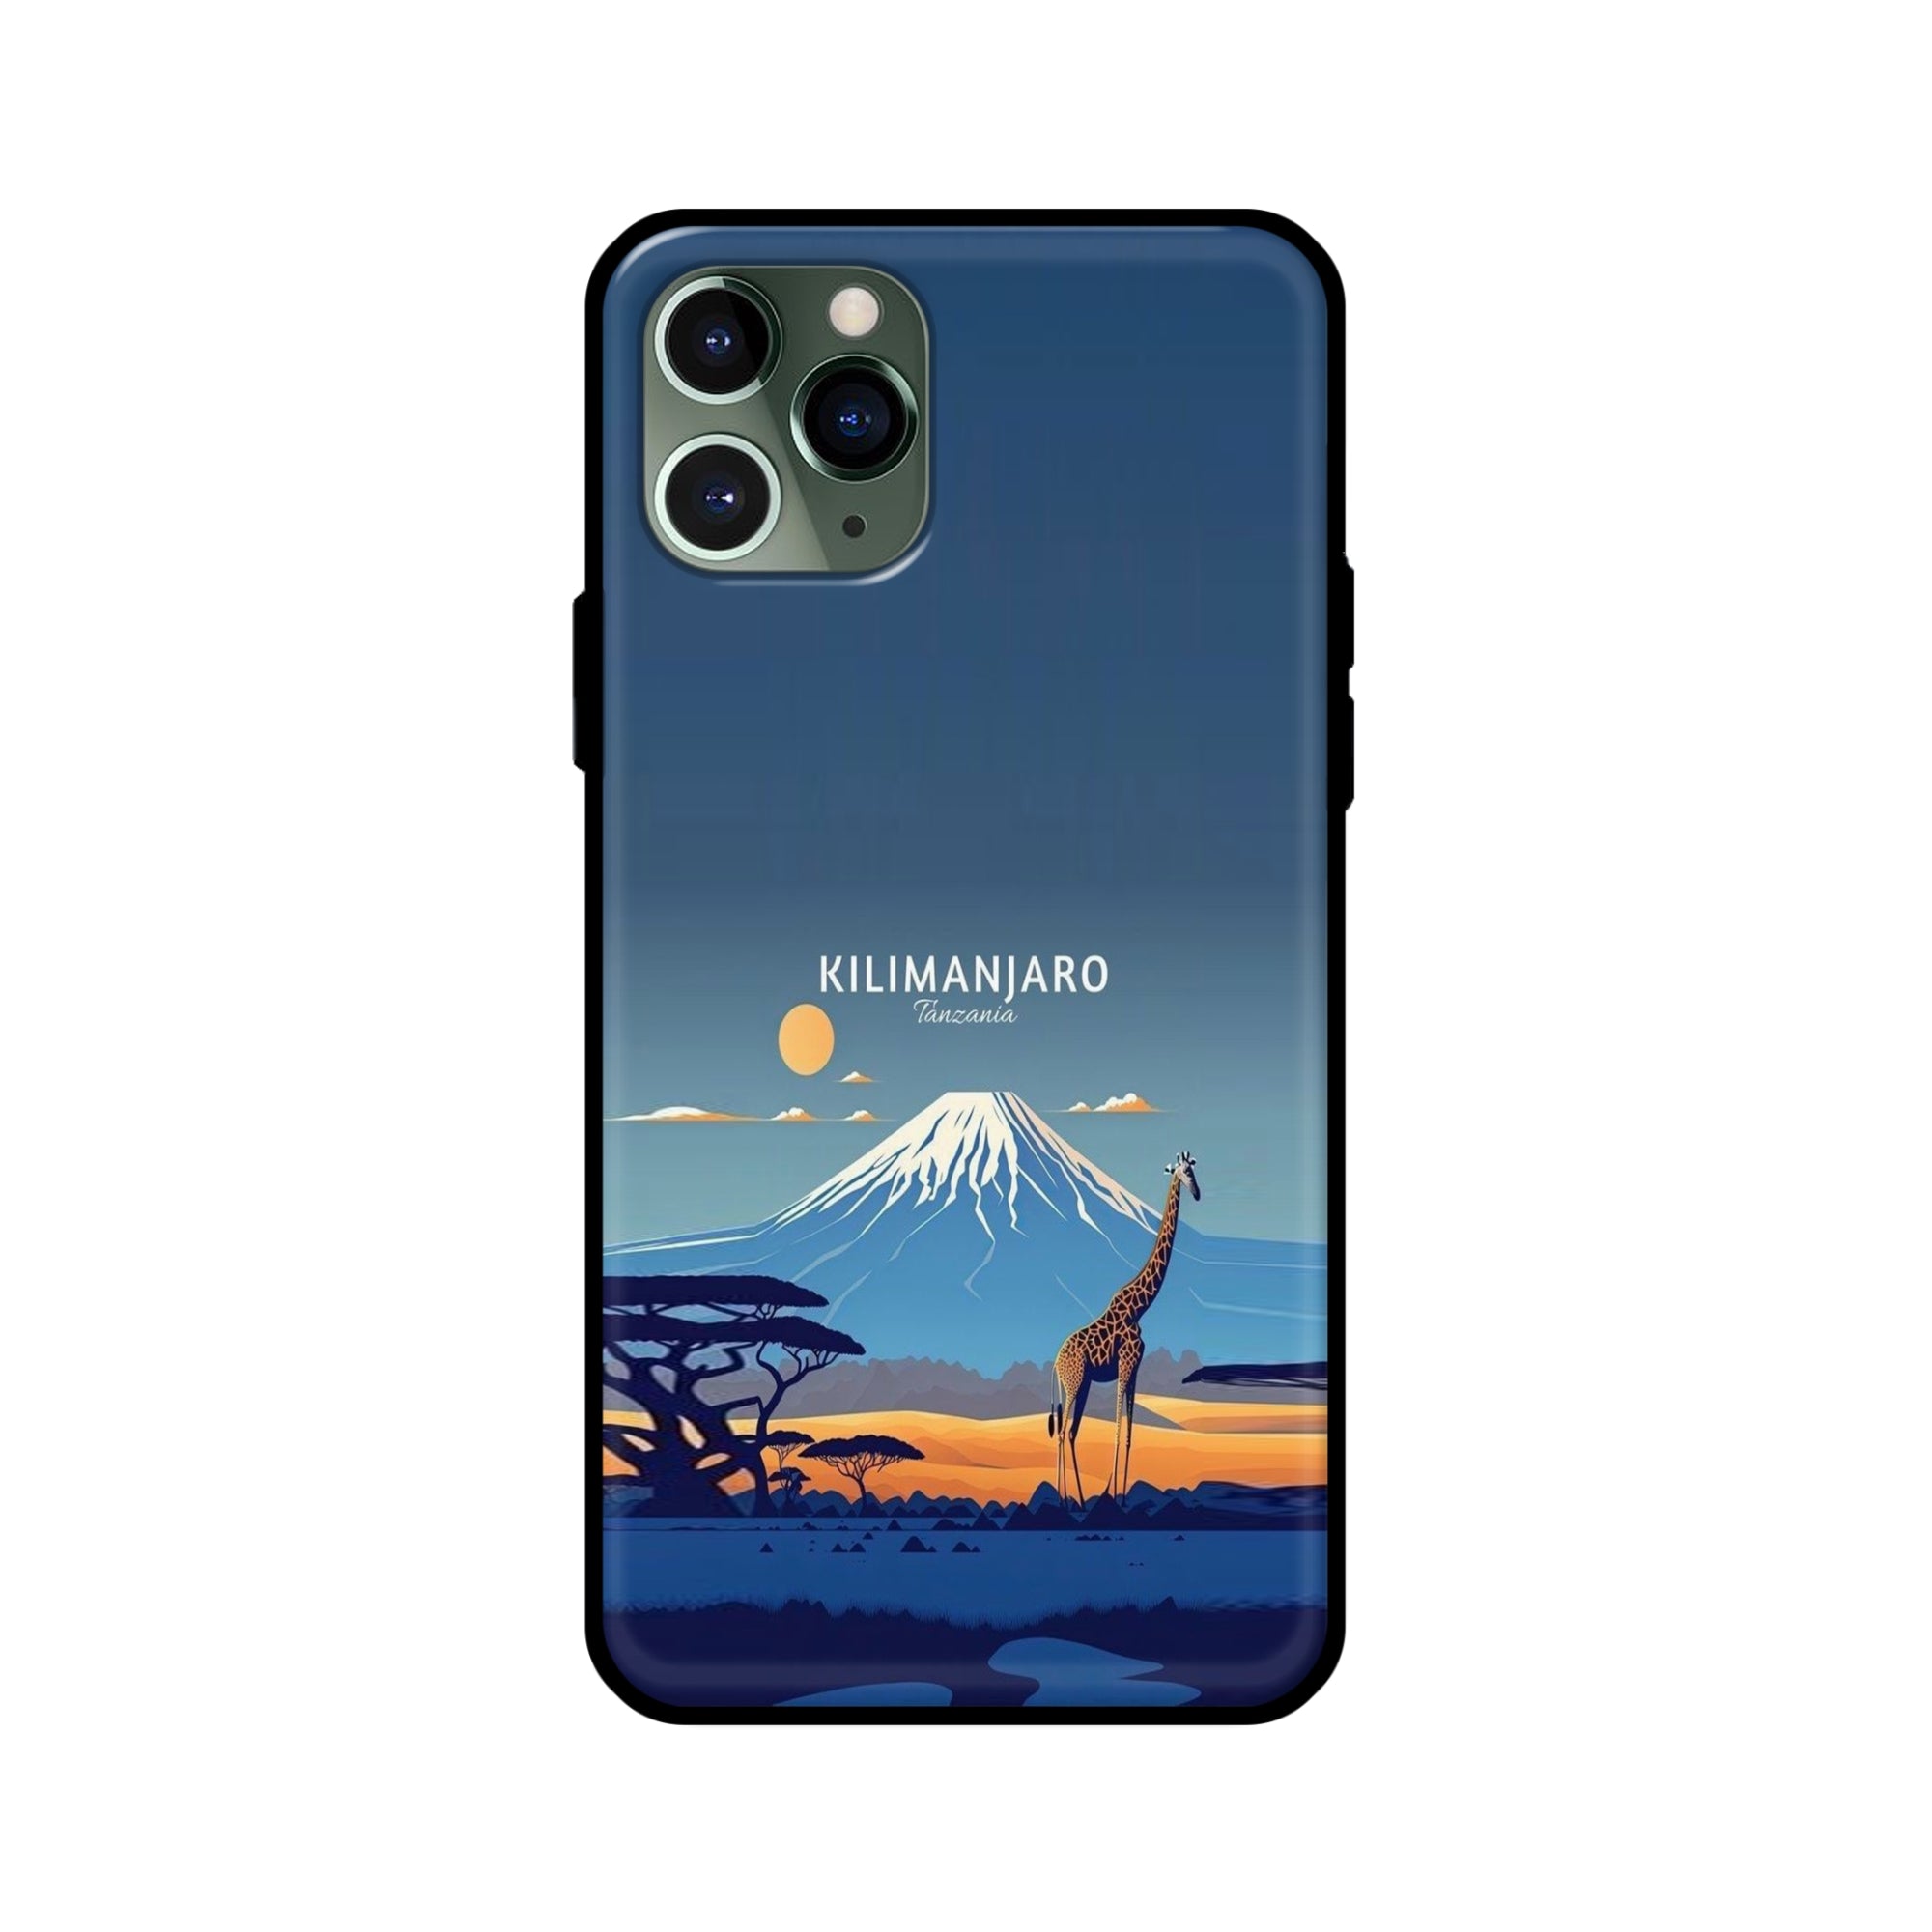 Buy Kilimanjaro Glass/Metal Back Mobile Phone Case/Cover For iPhone 11 Pro Online